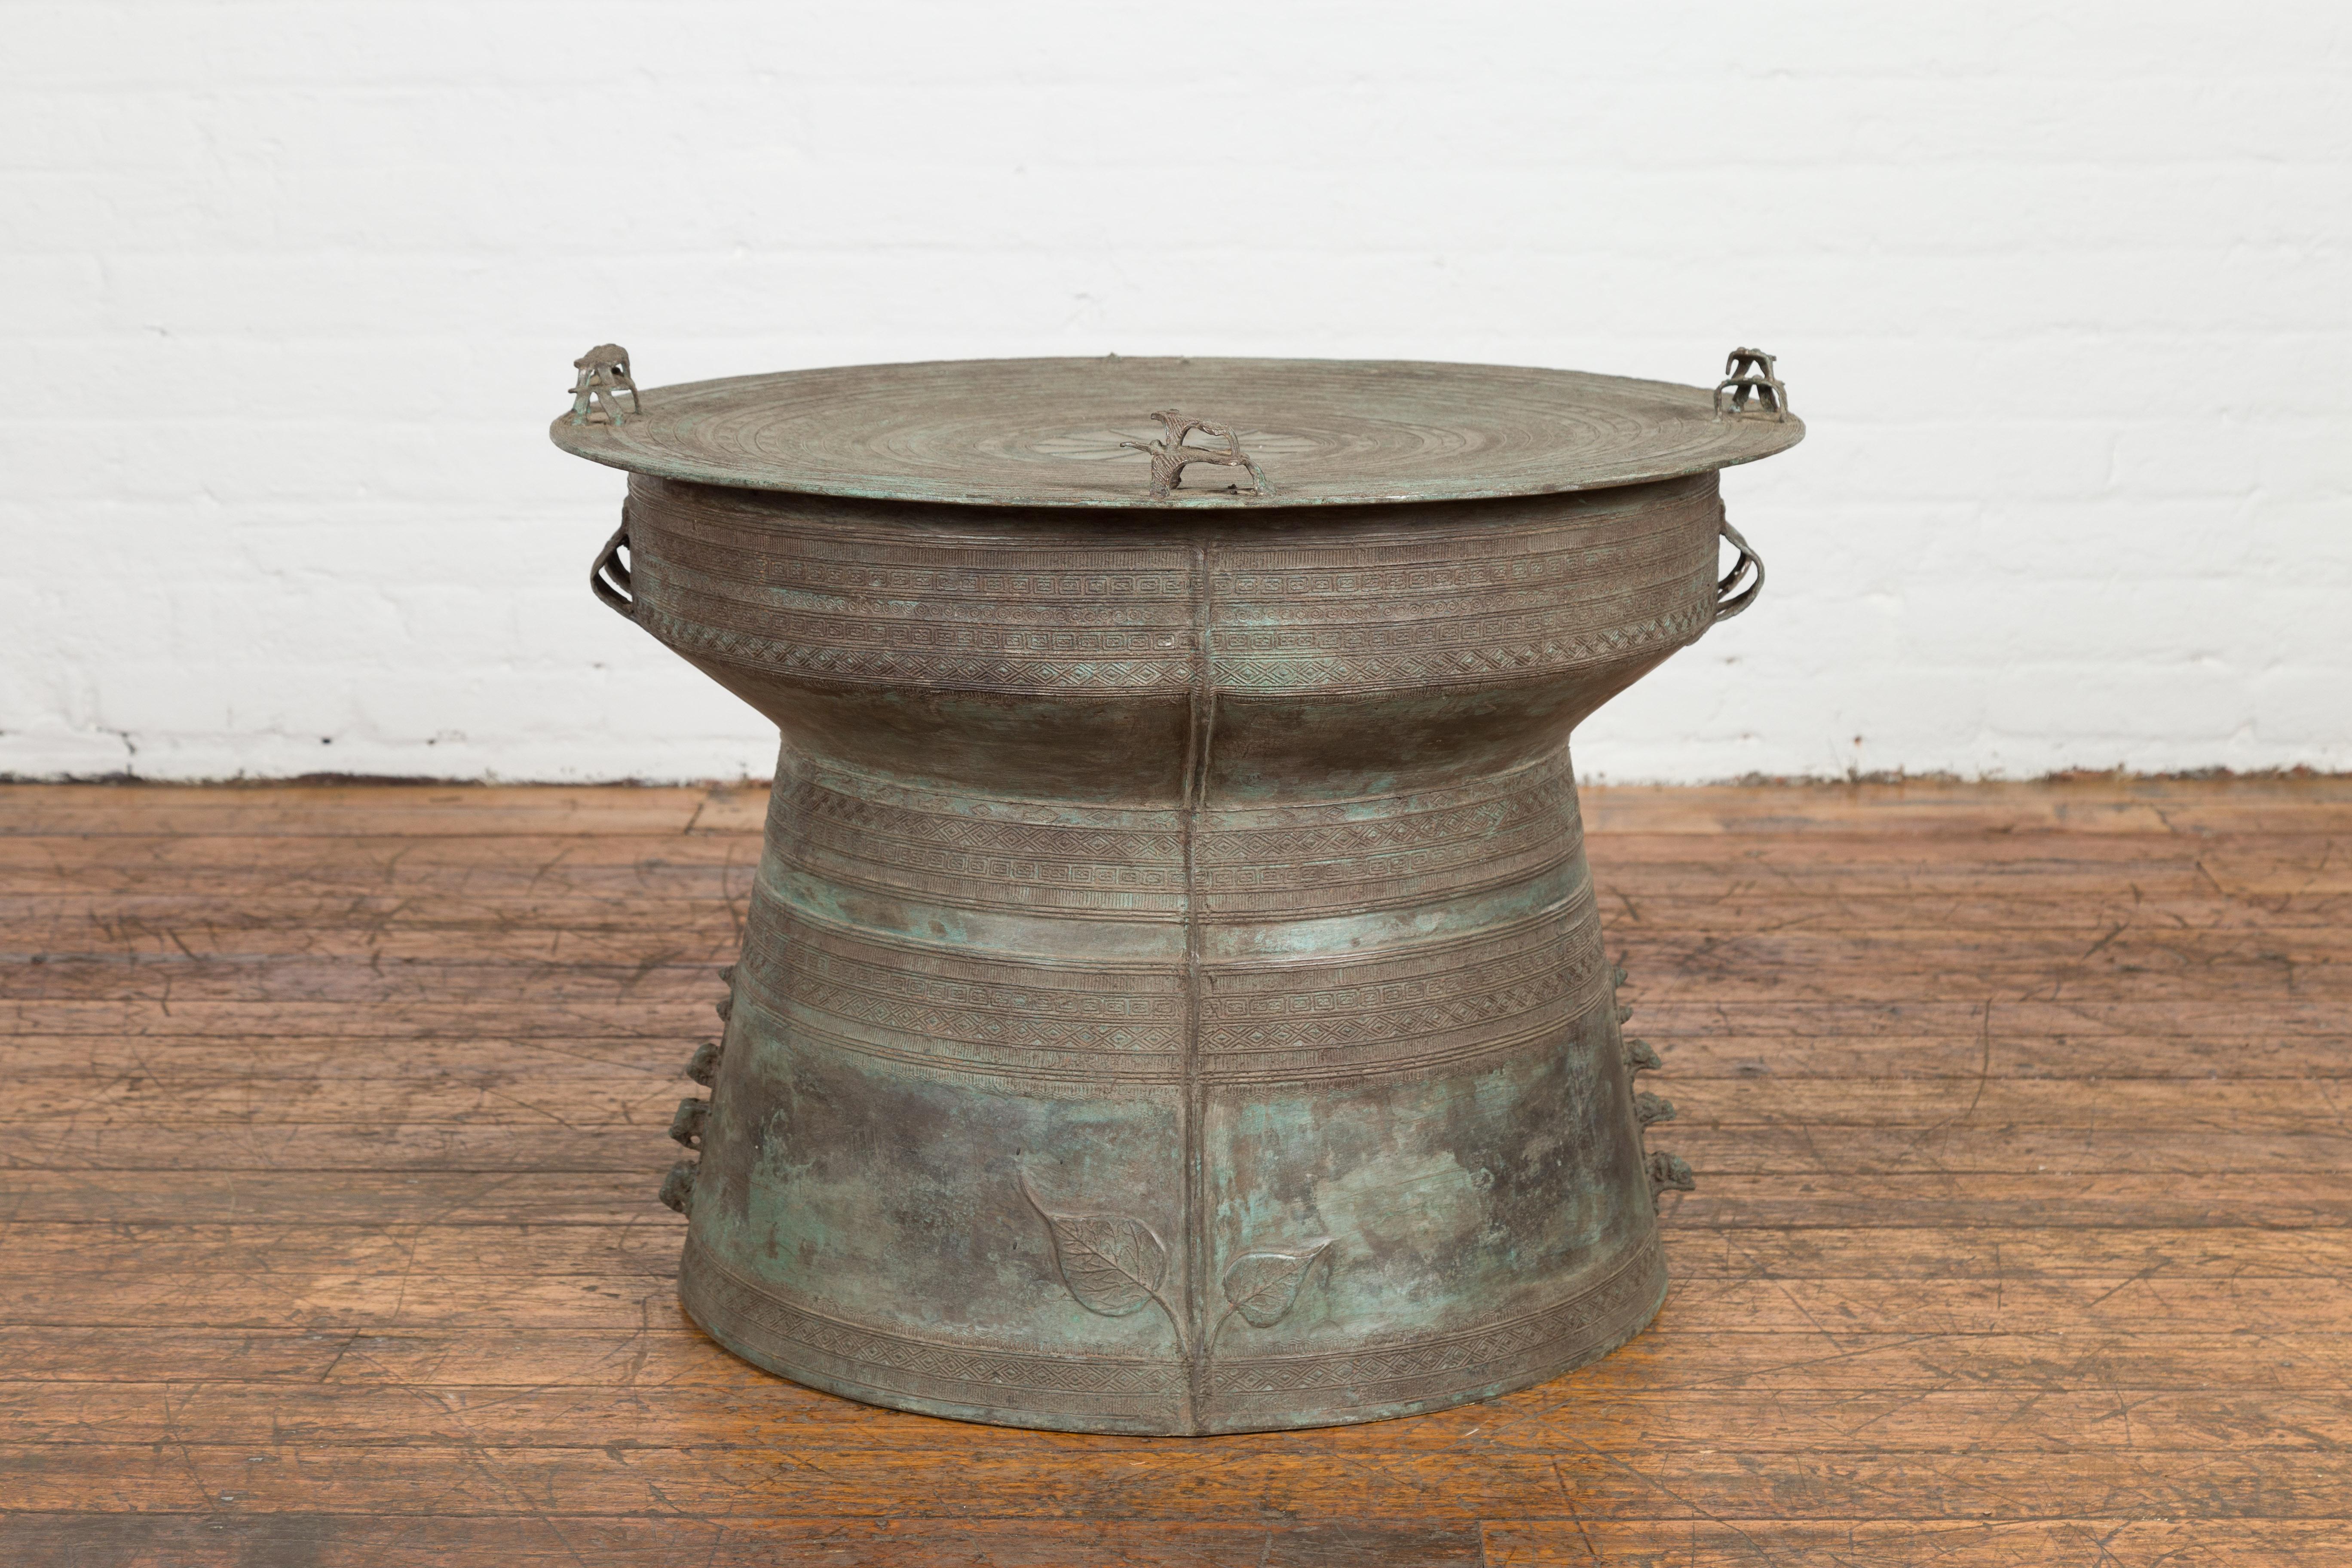 A Laotian style bronze rain drum side table from the Mid-20th Century, with geometric relief motifs, central sun and frog finials. Created during the midcentury period, this bronze drum table (named for the lovely sound that such tables make when